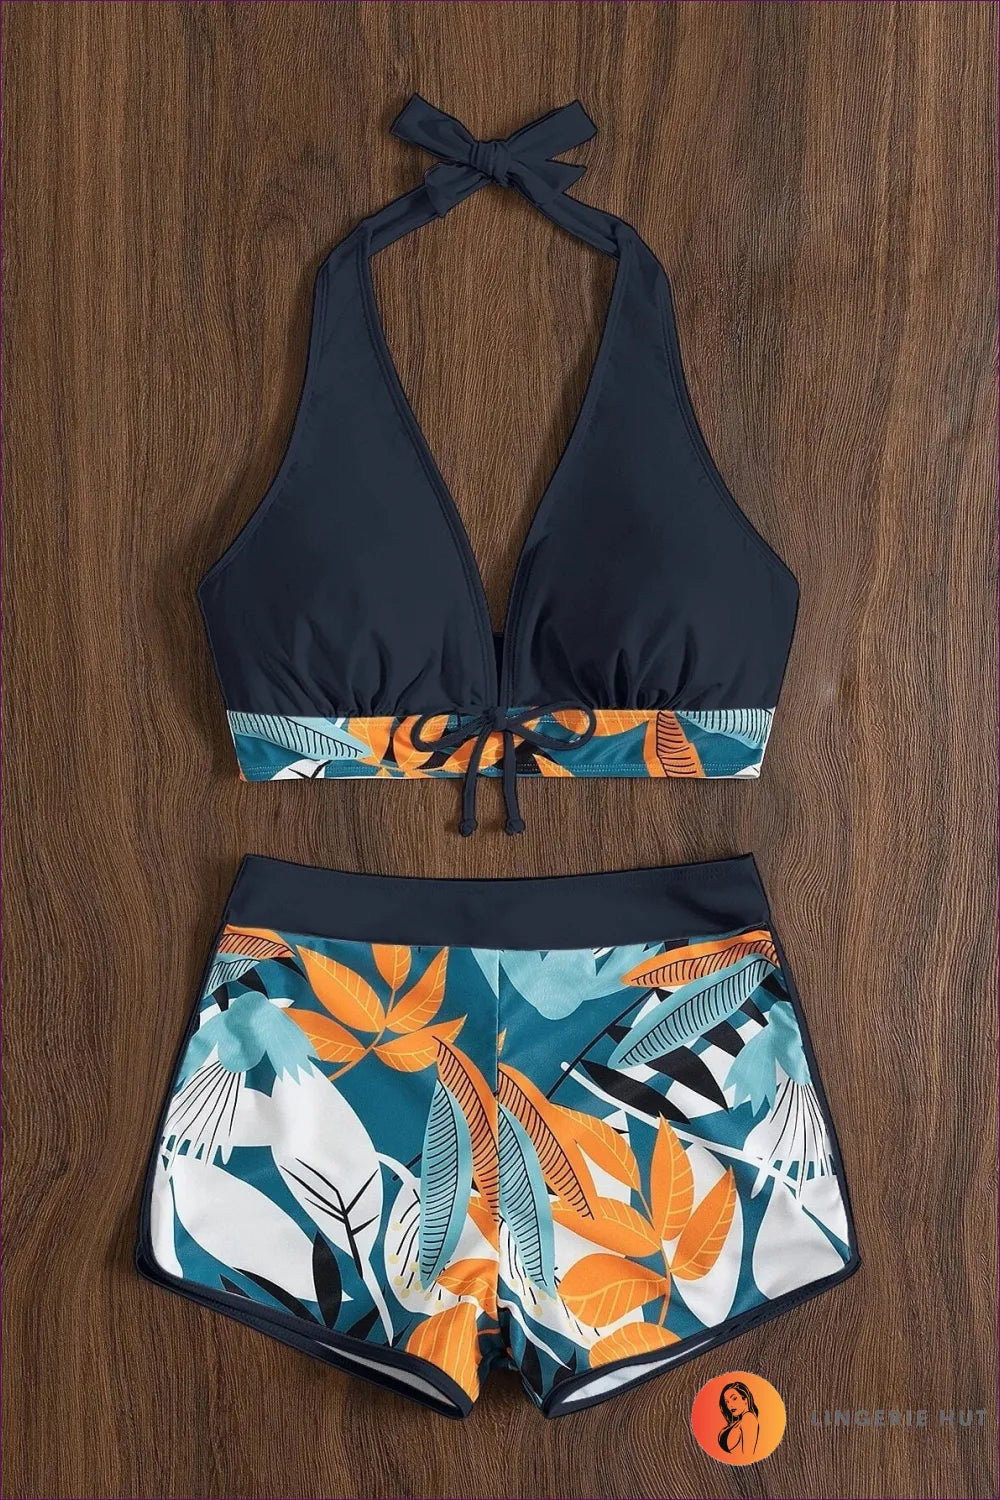 Make a Statement At Your Next Poolside Gathering With Our Alluring Print High Waist Swimsuit. Trendy High